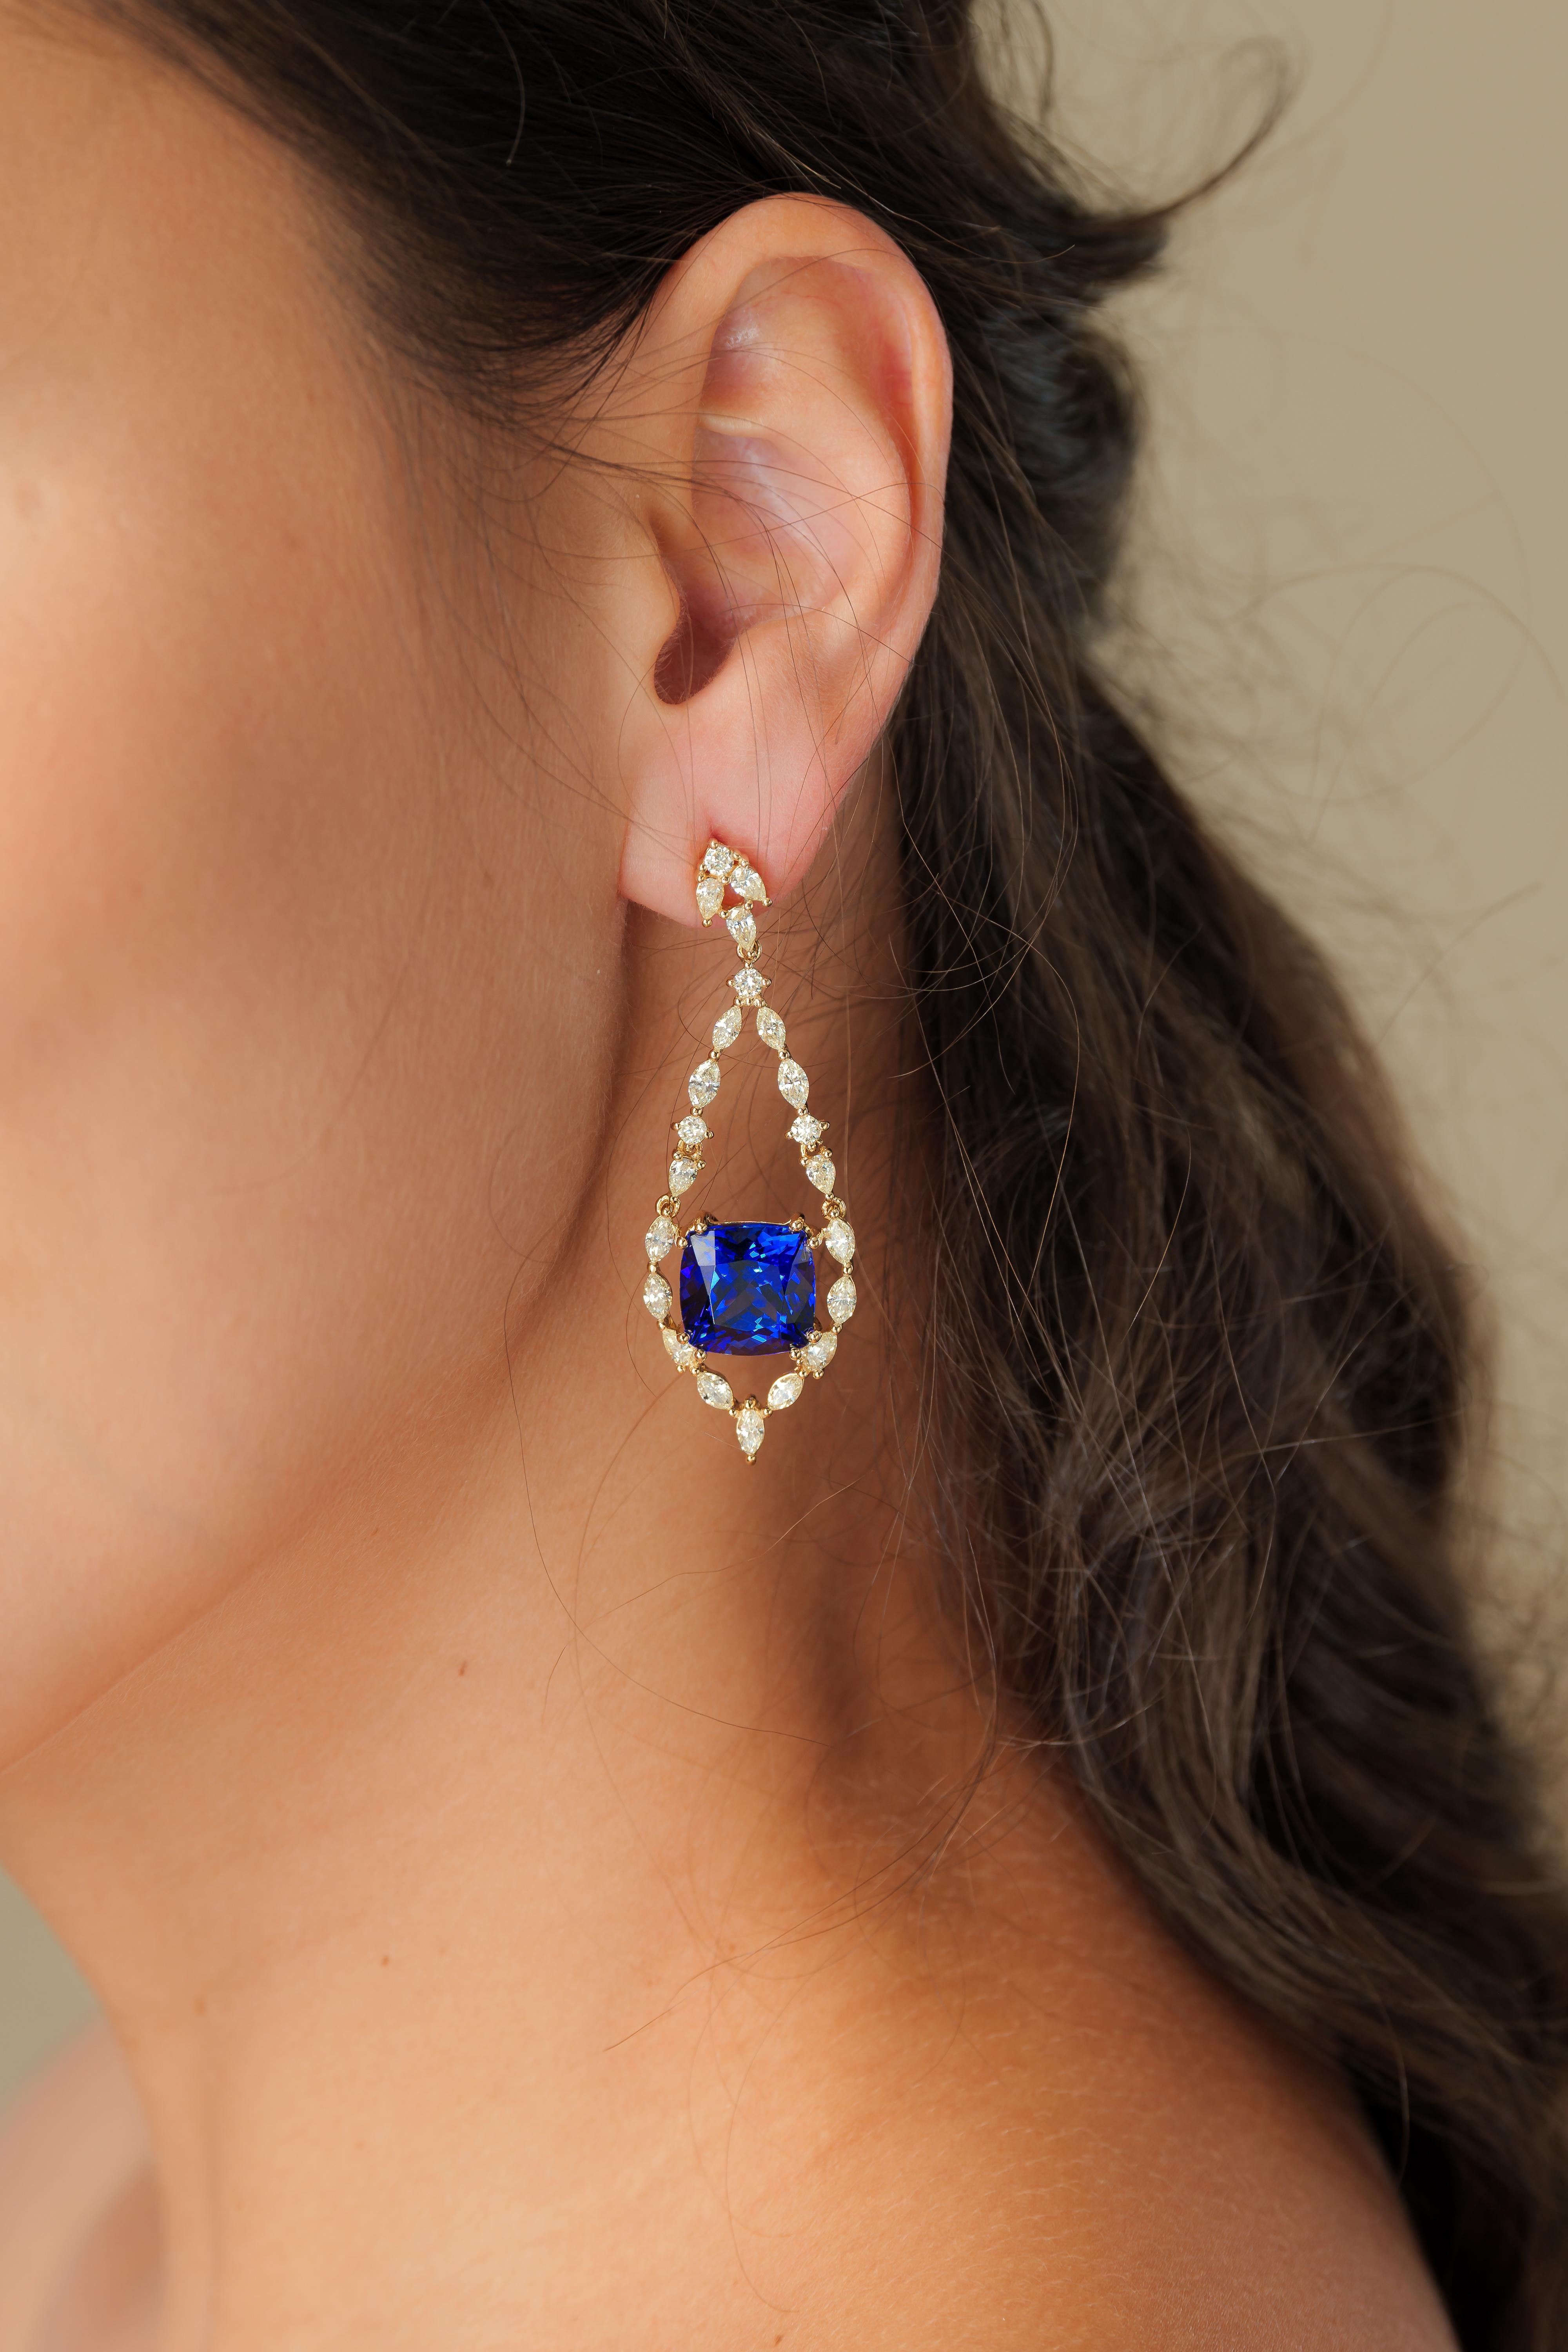 This collection features a selection of the most tantalizing Tanzanites. This enchanting East African gemstone can only be procured from one mine in the foothills of Mount Kilimanjaro, Tanzania. These Floating Tanzanite Orchid Earrings host rich